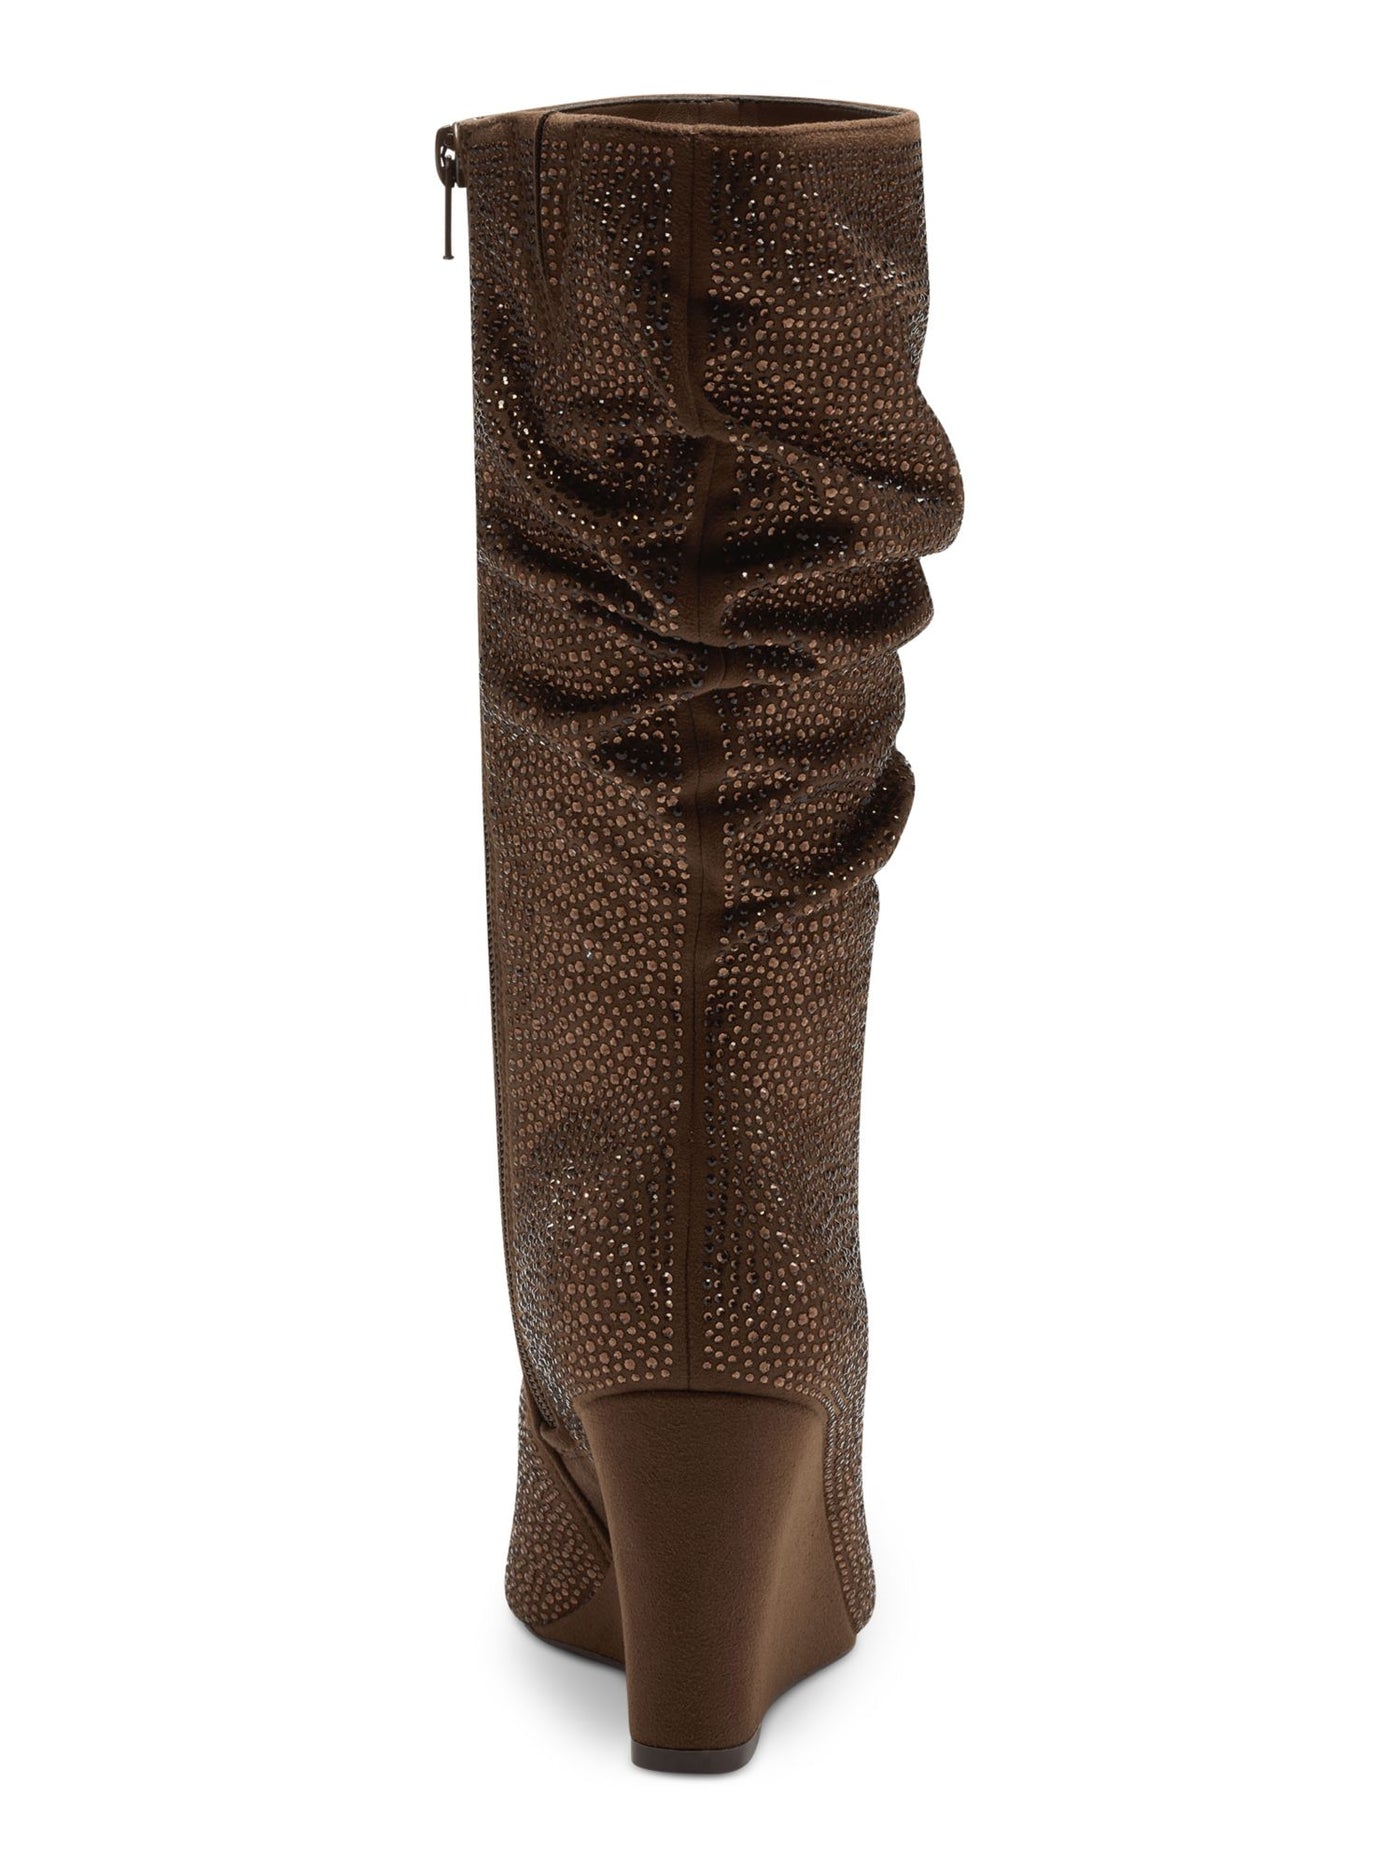 INC Womens Brown Cushioned Rhinestone Florelle Pointed Toe Wedge Zip-Up Dress Slouch Boot 7.5 M